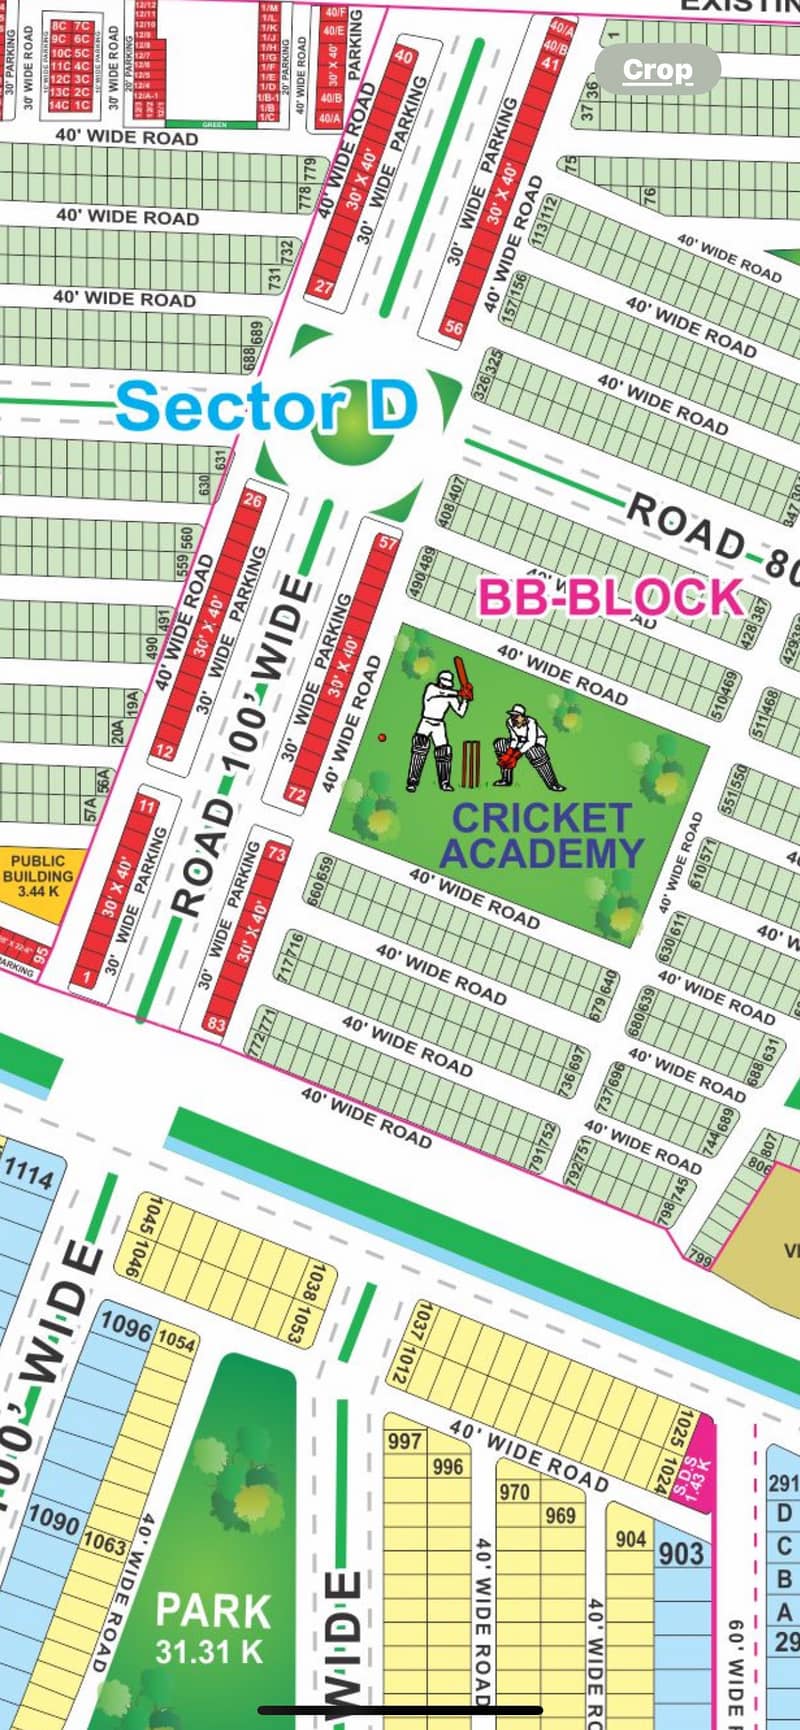 3 Commercial plot Available For sale 77 and 78 or 79 BB block Open No Tax No Transfer Fee 1